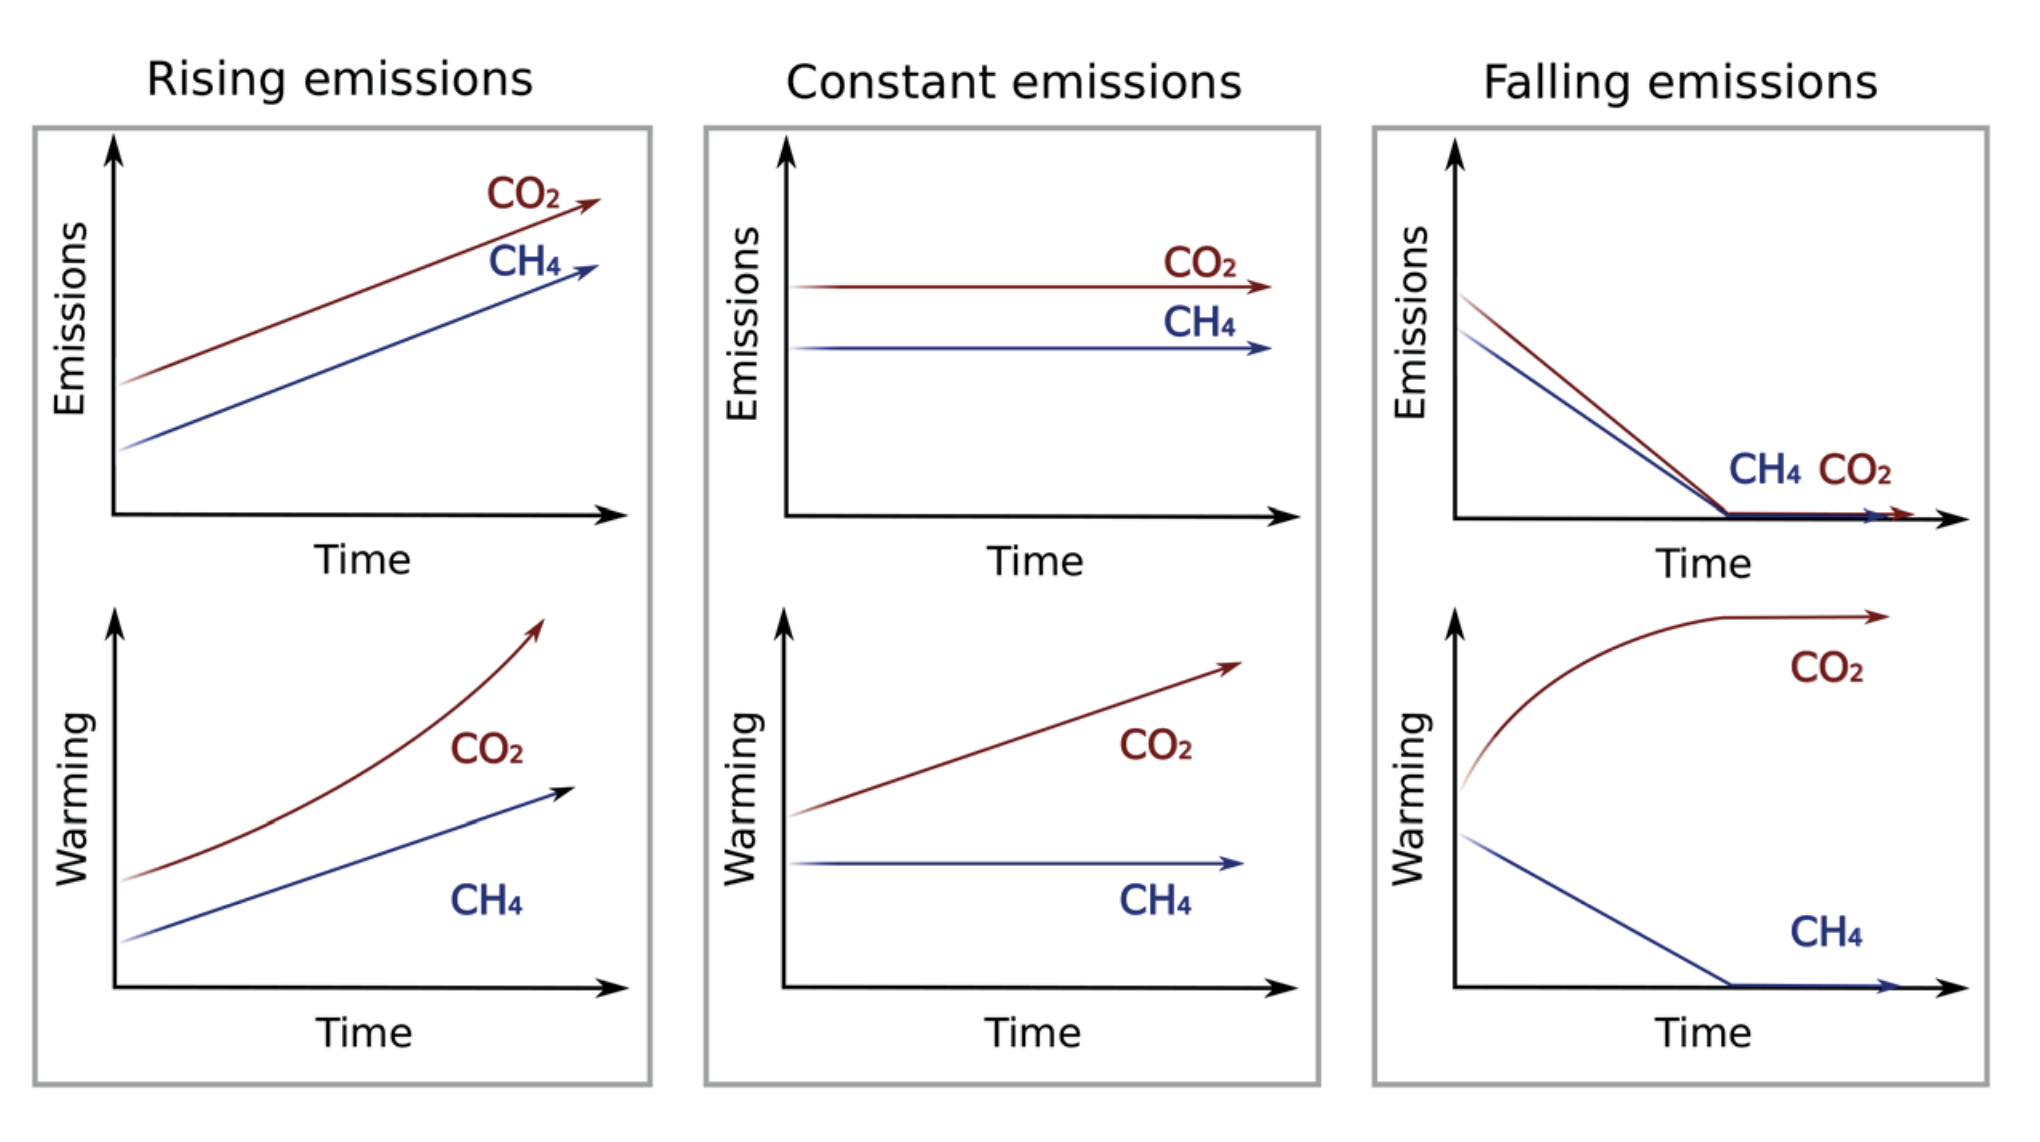 Methane Warming compared to CO2